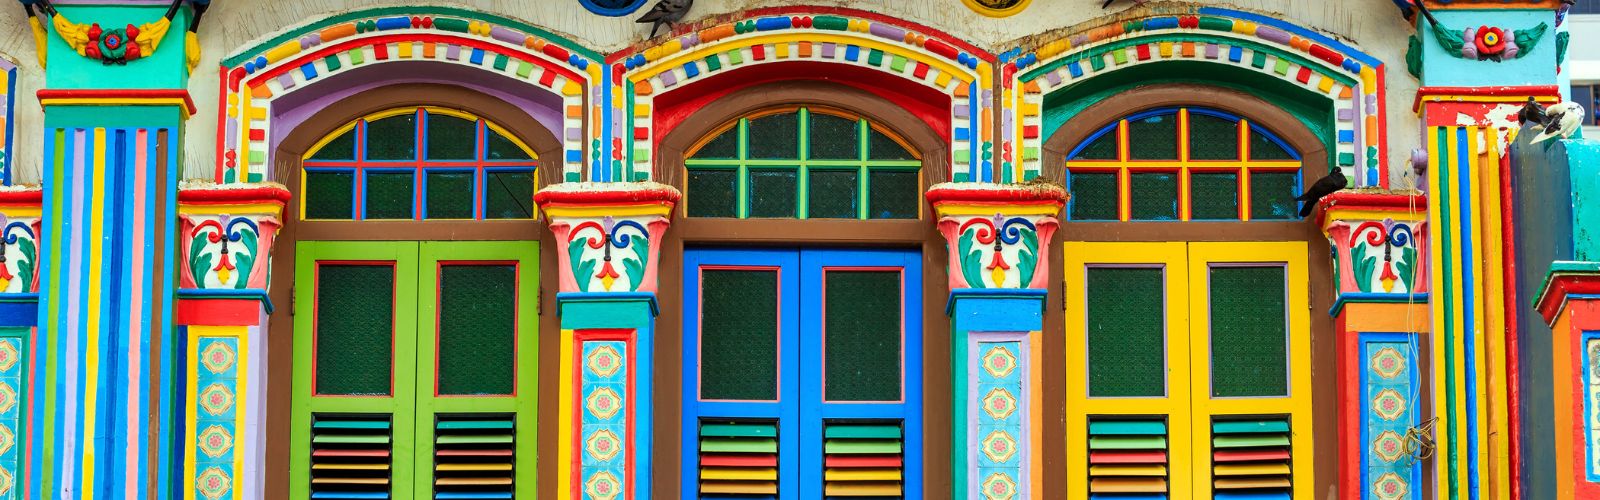 Facade of the Building in Little India, Singapore